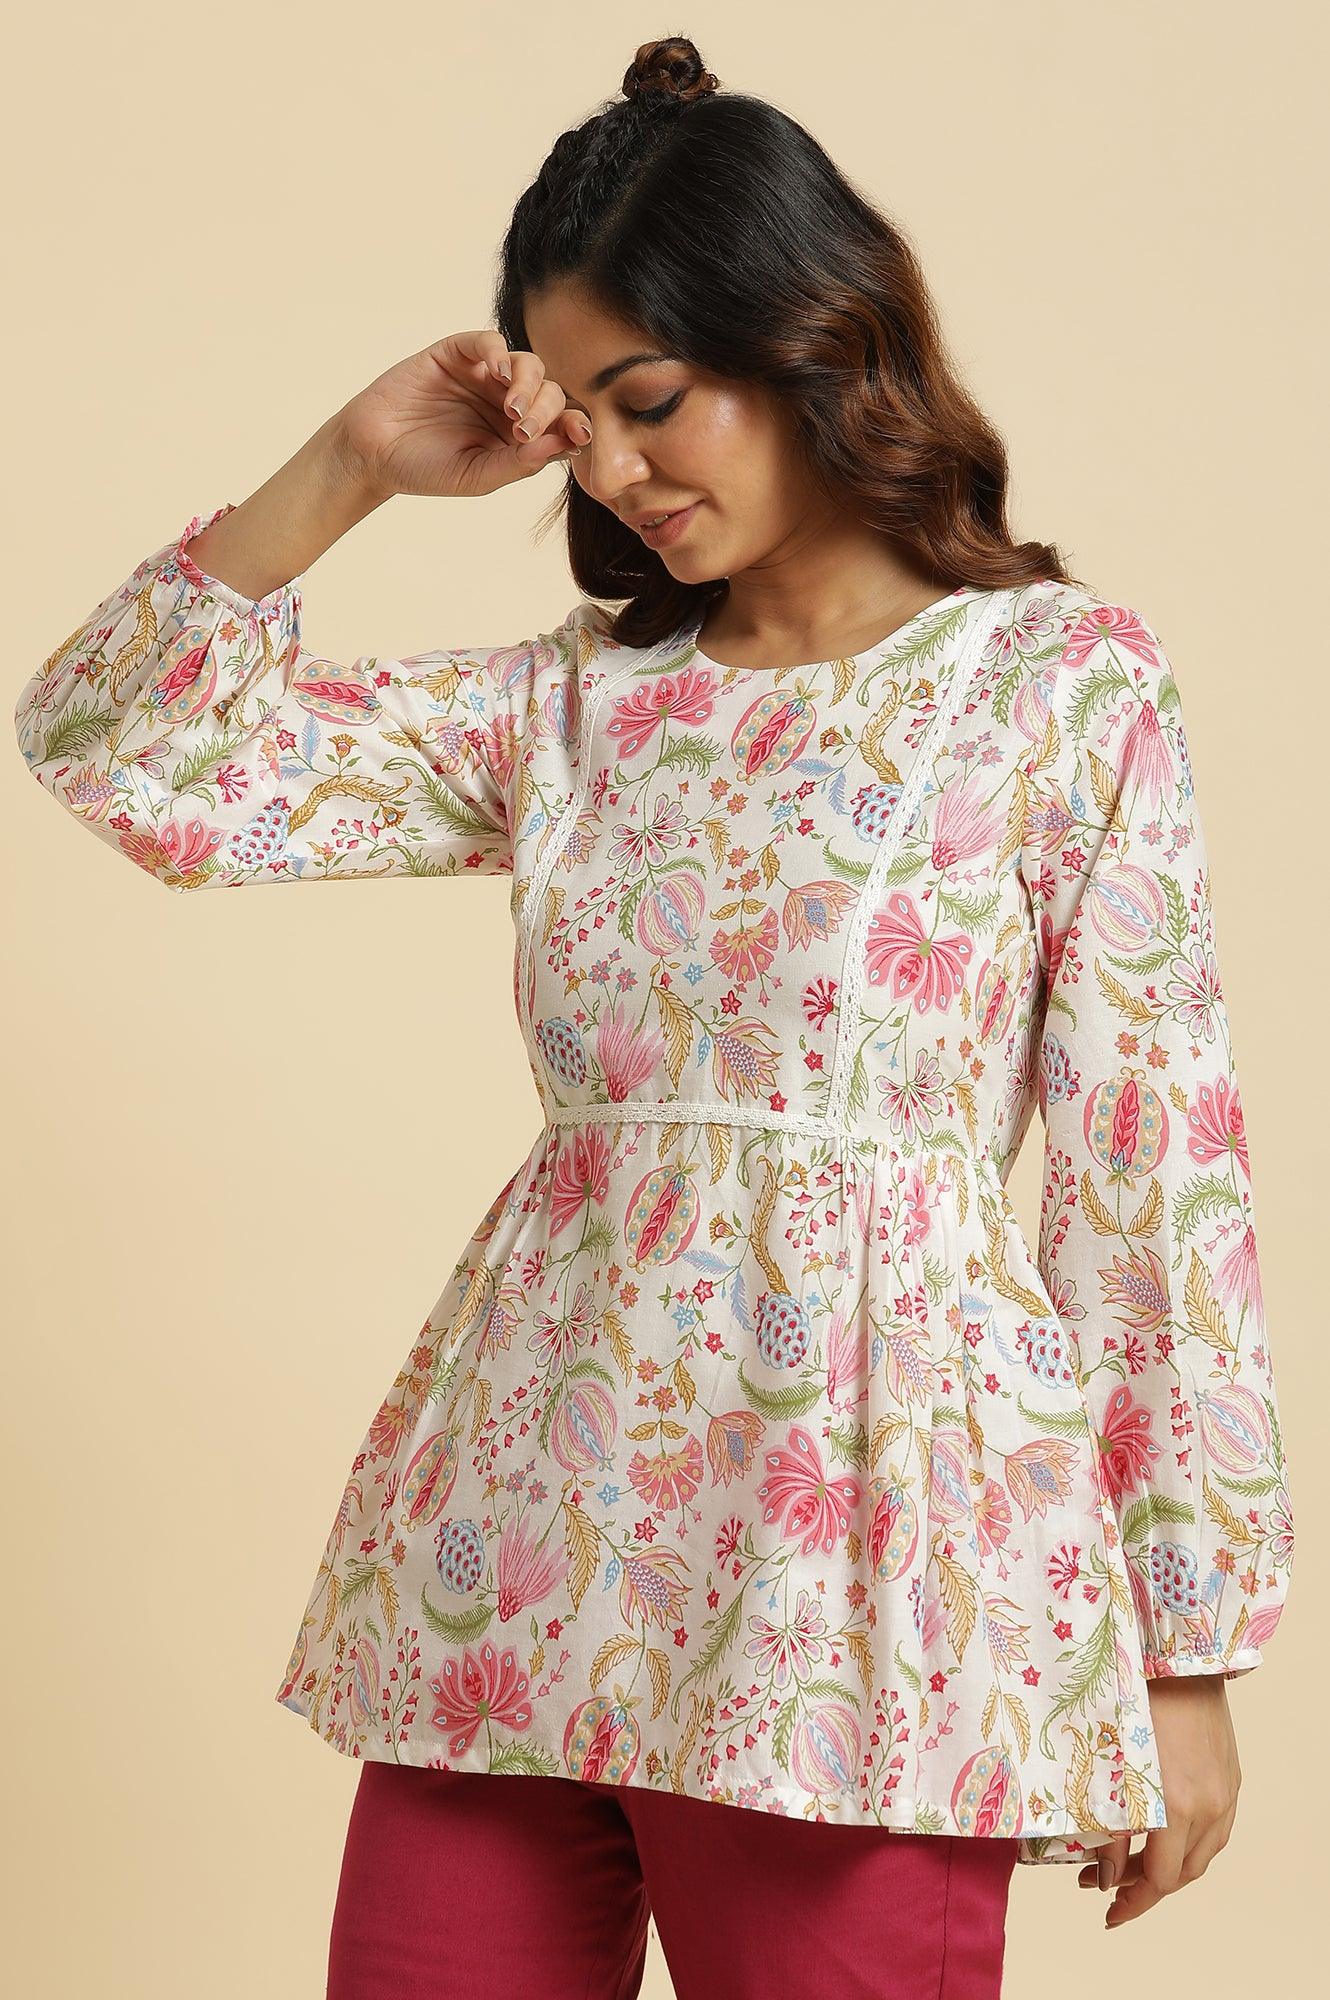 Ecru Gathered Top With Bright Floral Print - wforwoman